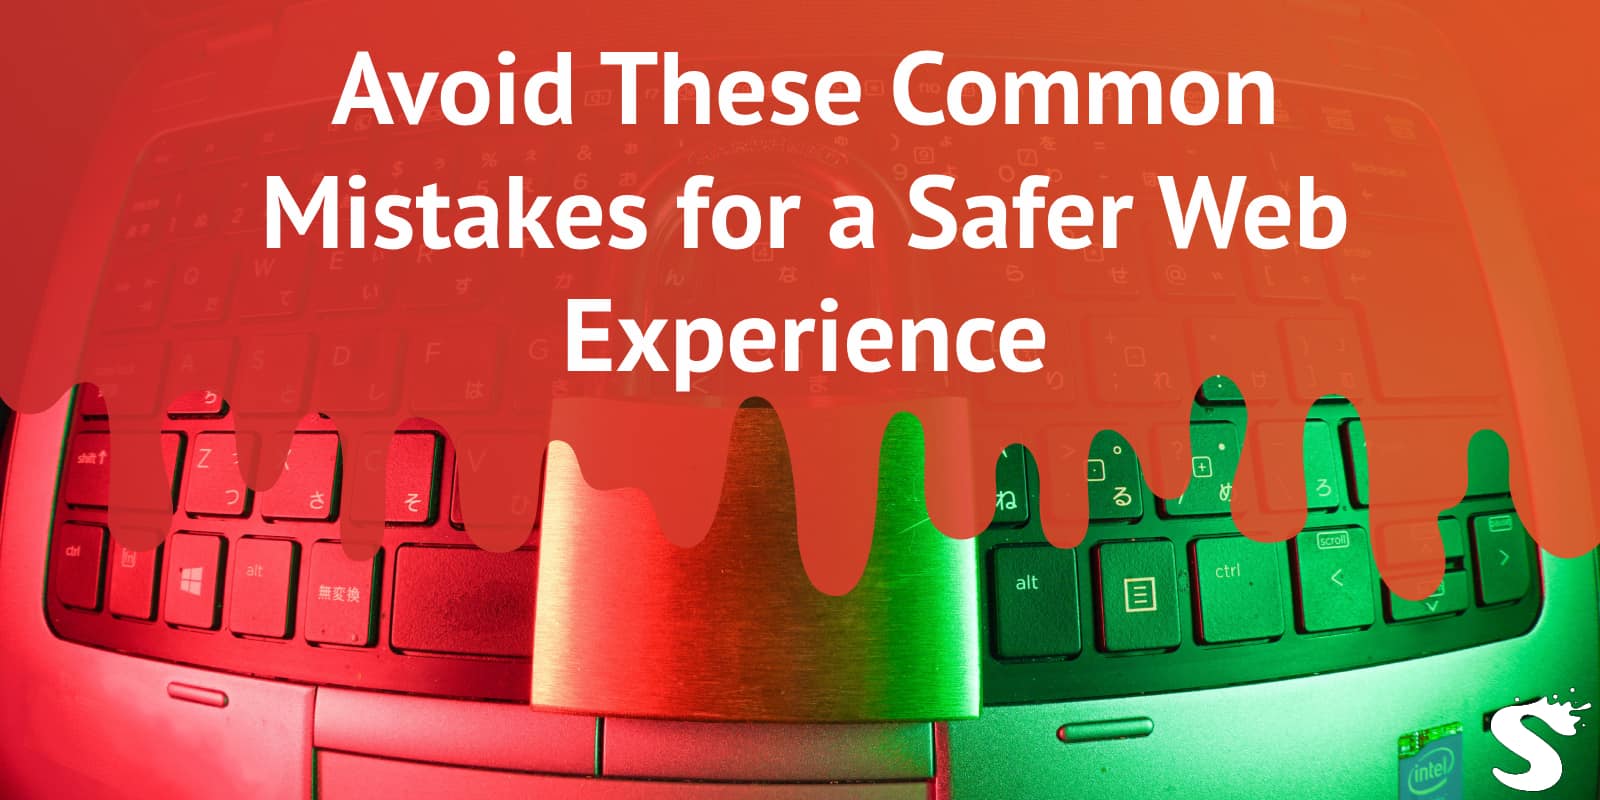 Avoid These Common Mistakes for a Safer Web Experience